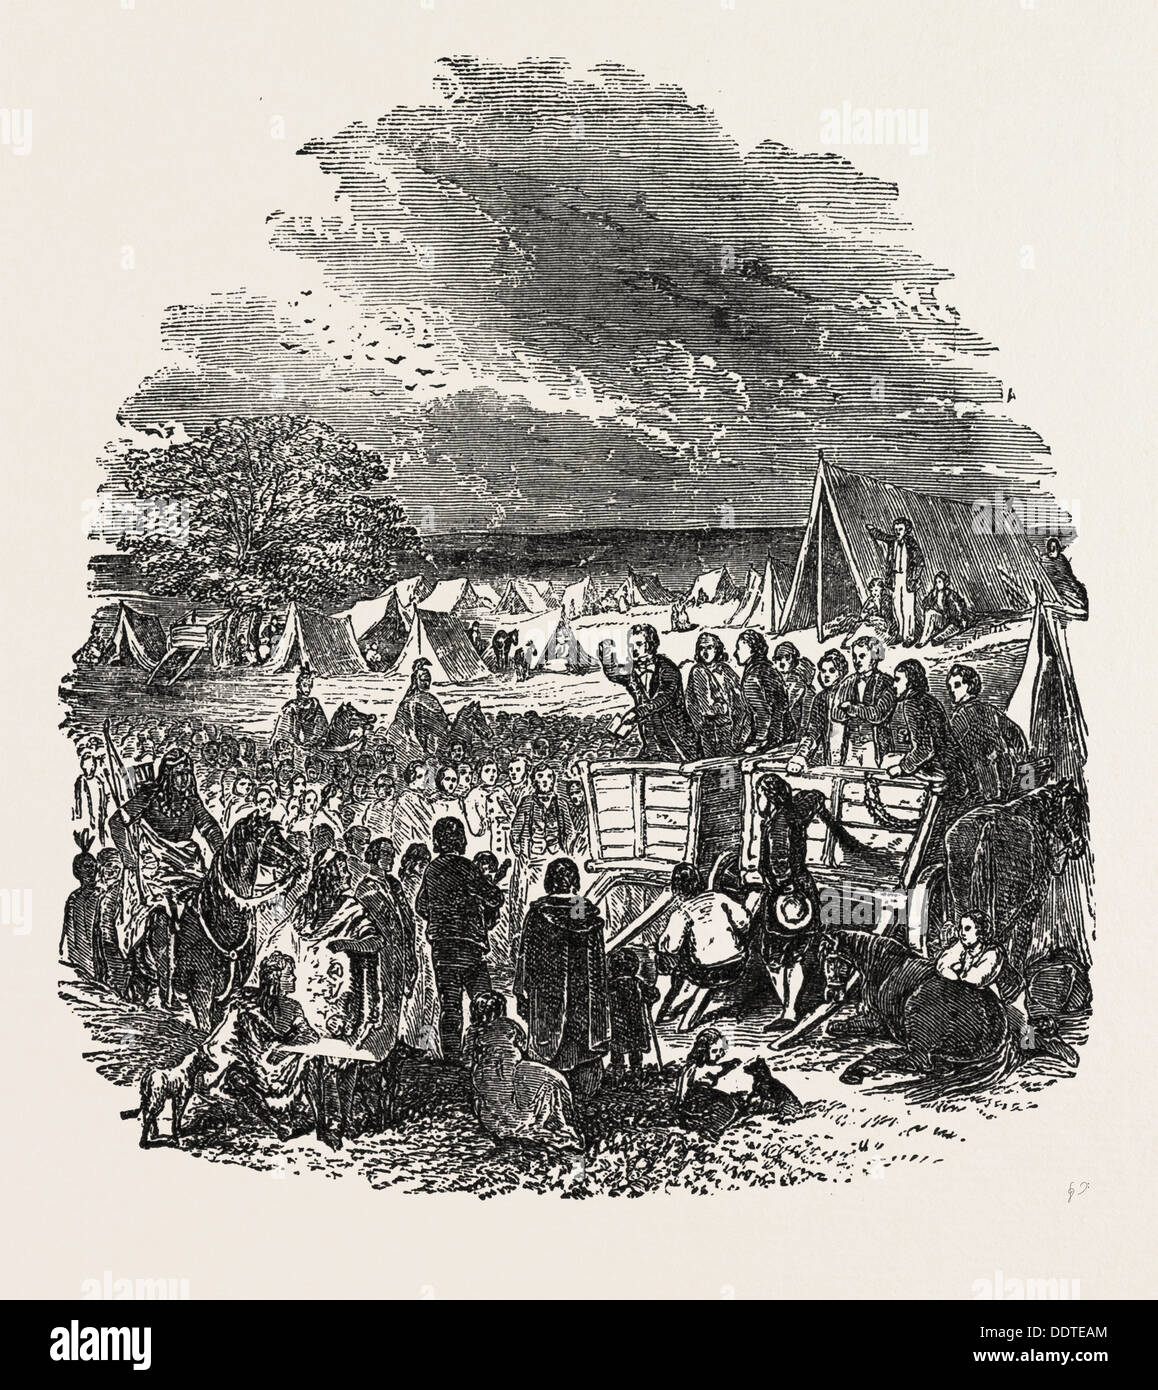 JOSEPH SMITH PREACHING IN THE WILDERNESS., THE MORMONS, 1851 engraving Stock Photo